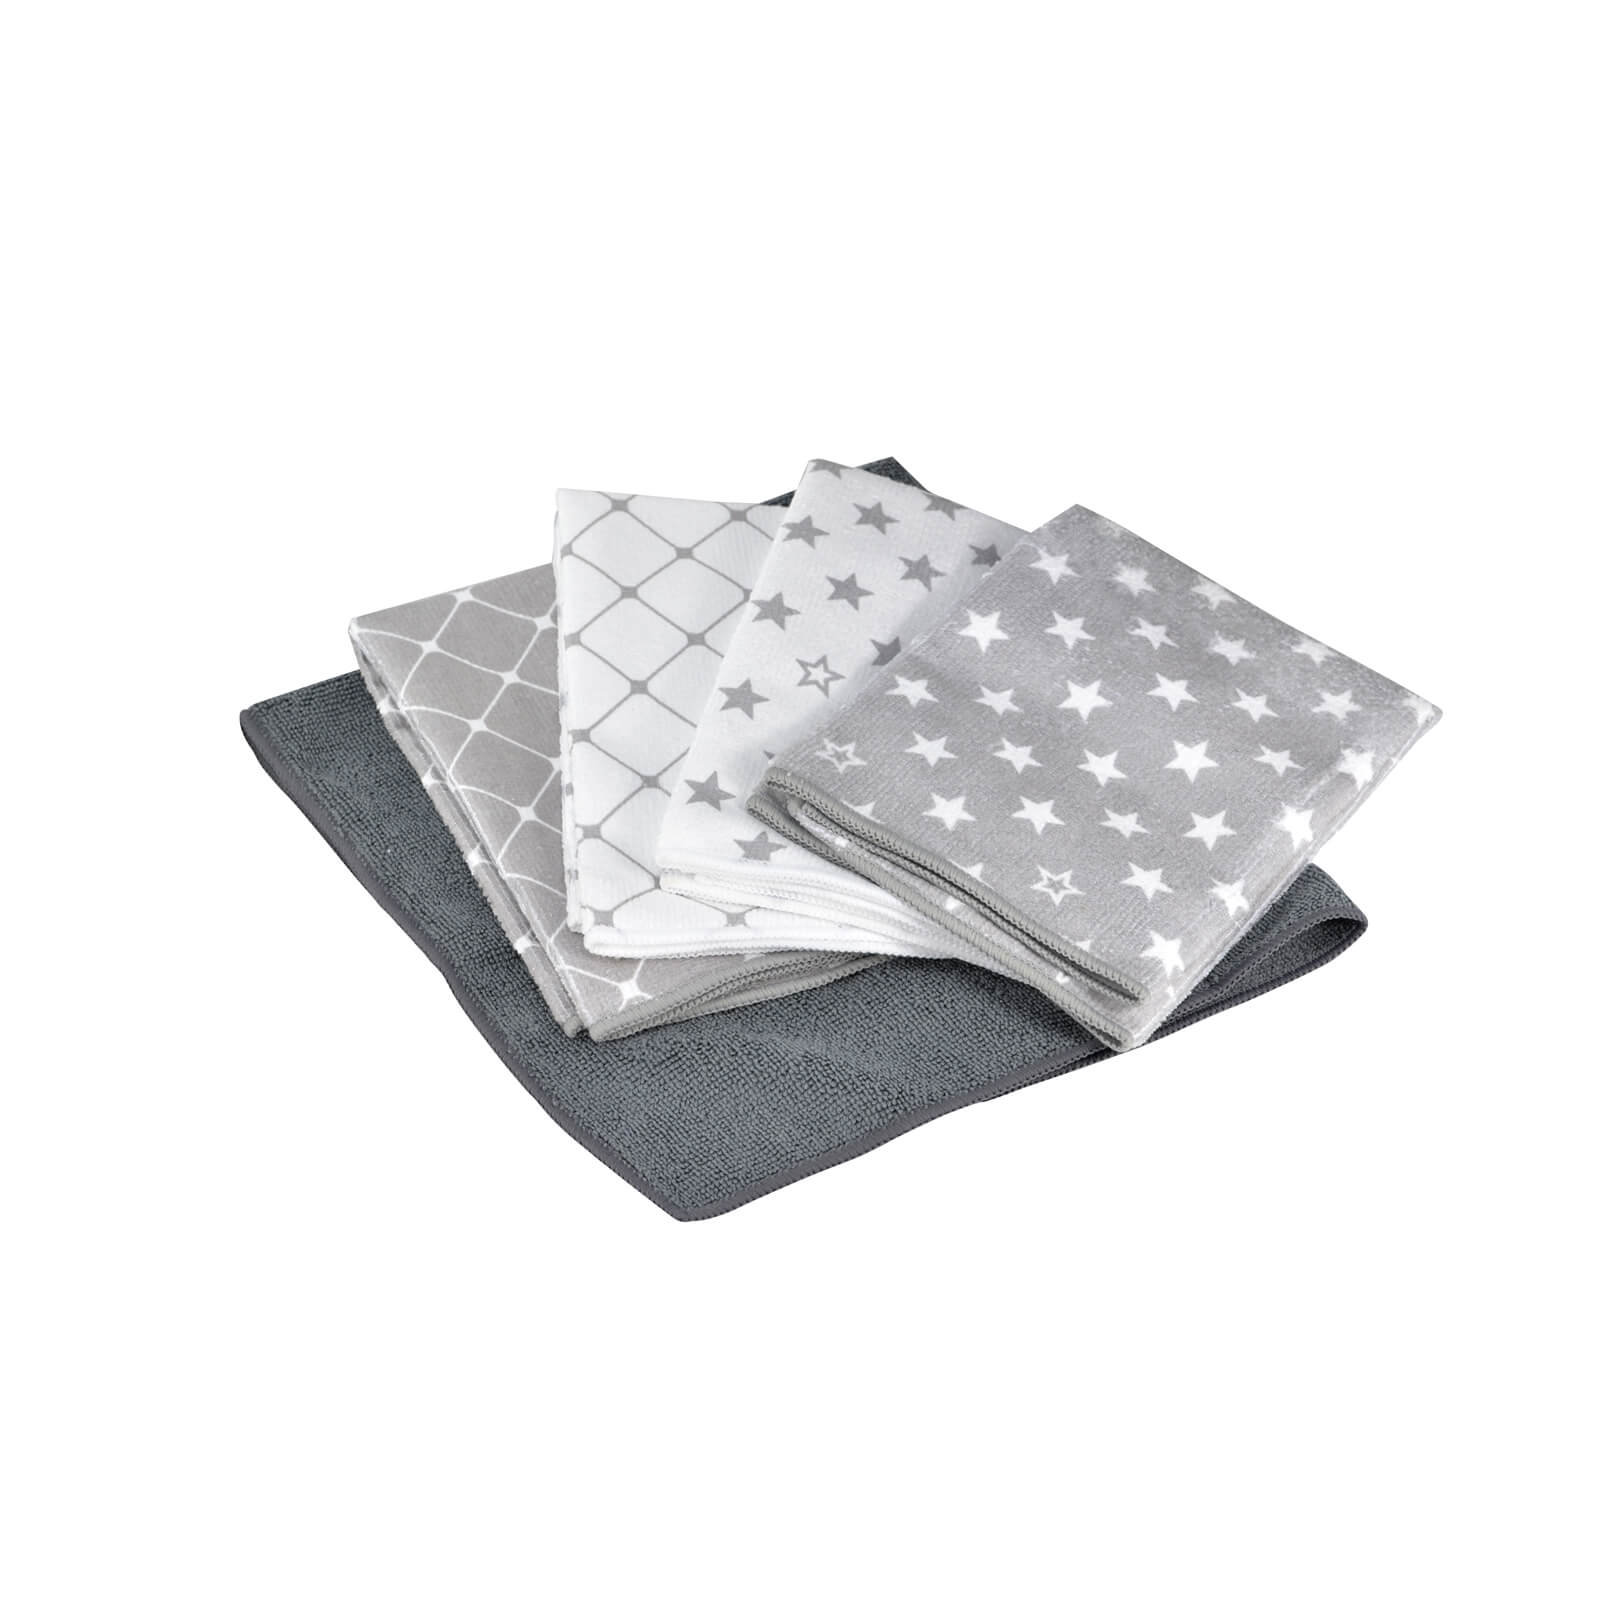 5 pack of Microfibre Patterned Cleaning Cloths